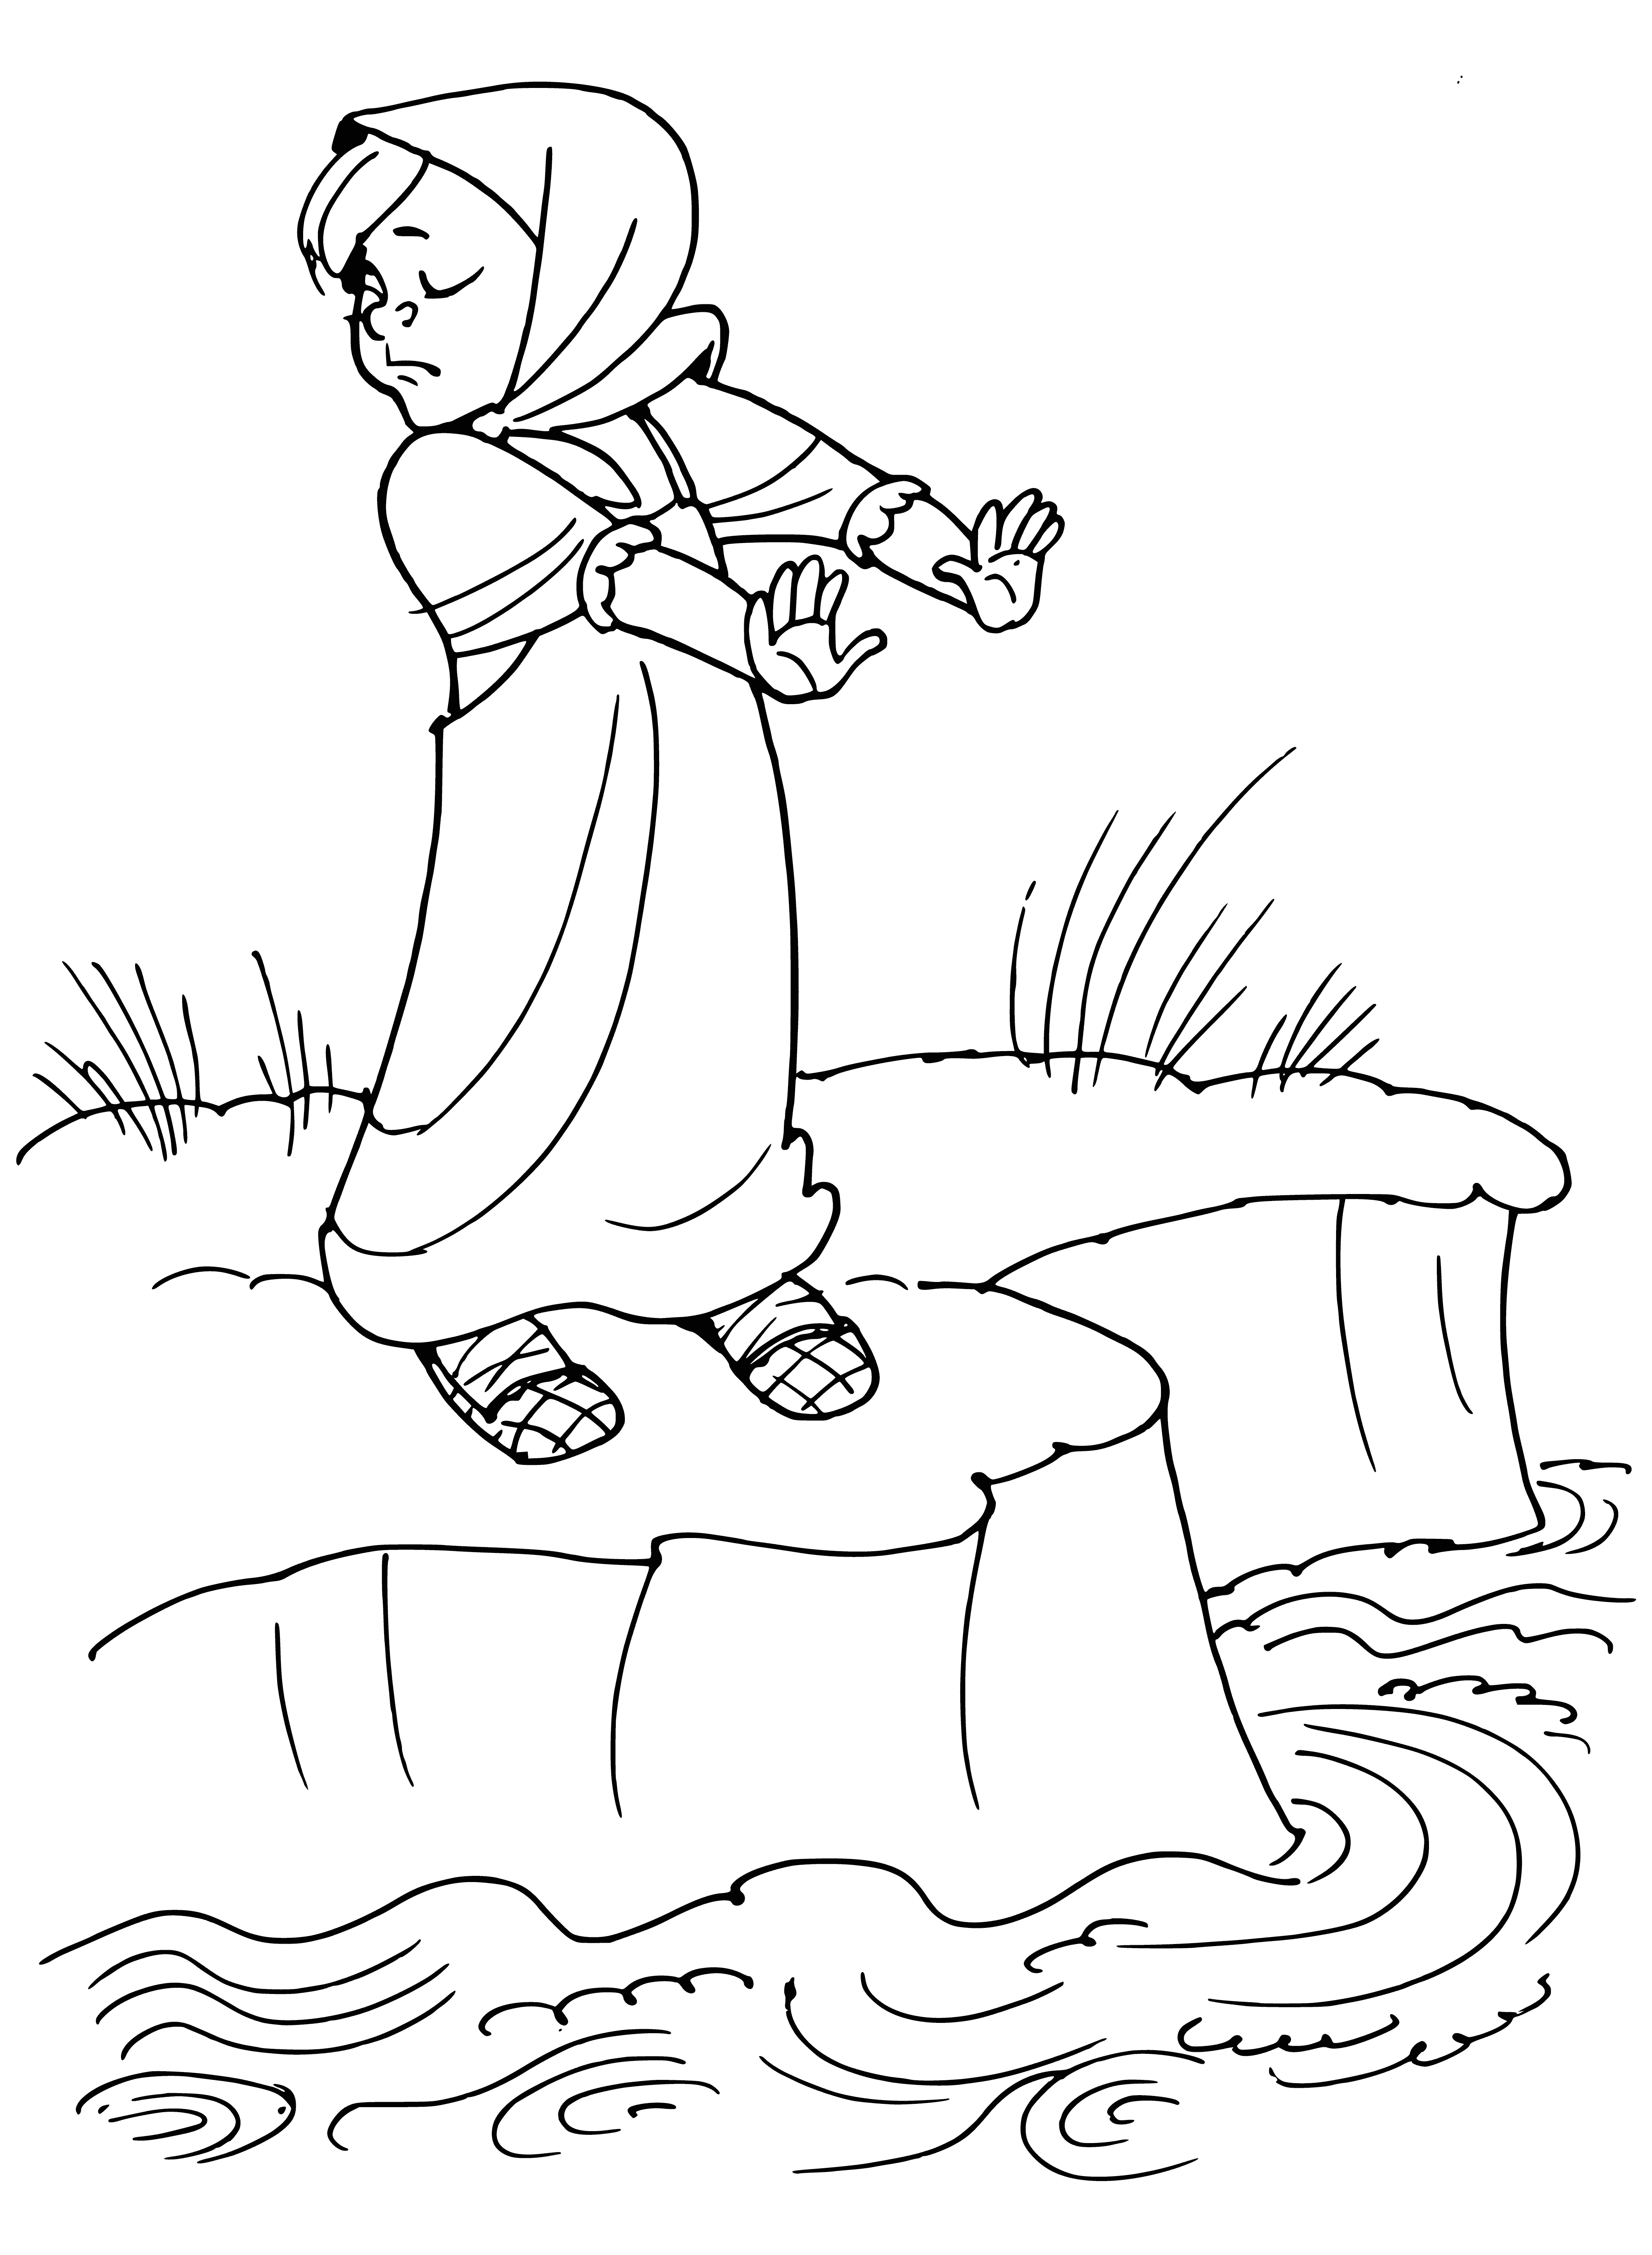 coloring page: Couple in boat on milky river with mountains and forest in background; woman holds a baby.